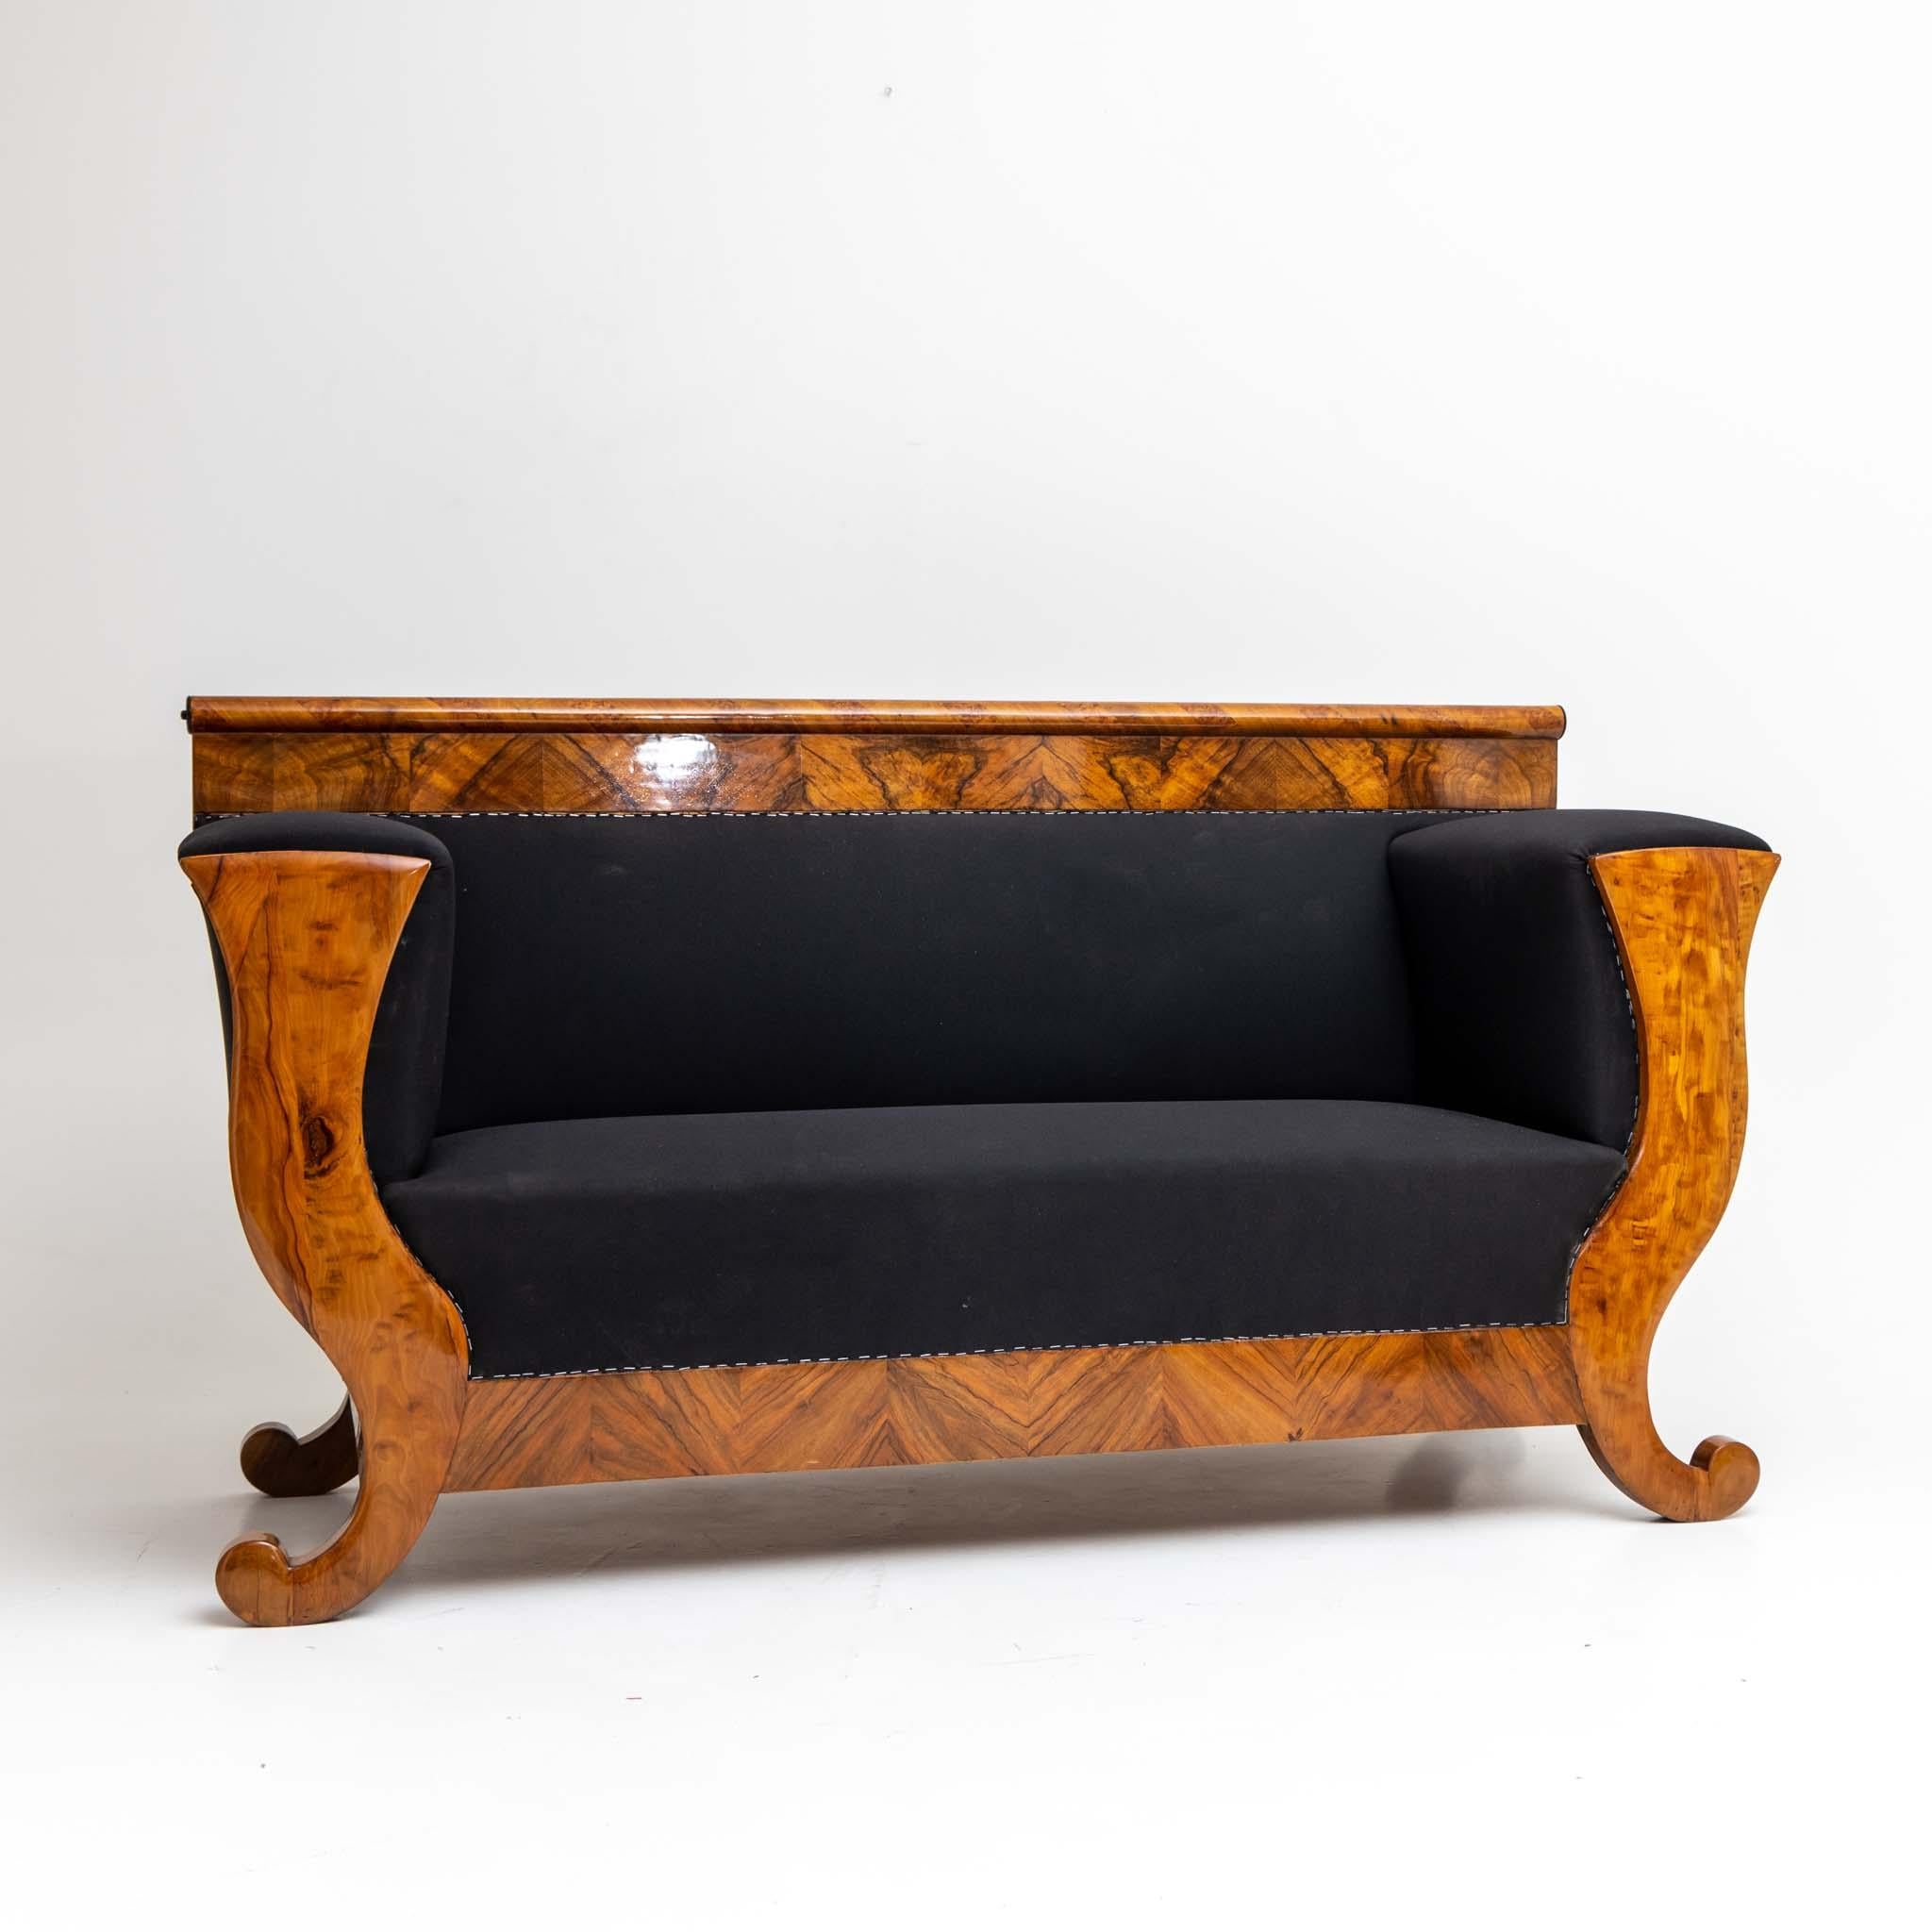 Large Biedermeier sofa with thick armrests and curved sides. The sofa is veneered in walnut and has been polished by hand. The Sofa has been reupholstered with a black base fabric and is ready to be covered with a new outer fabric. Old label on the